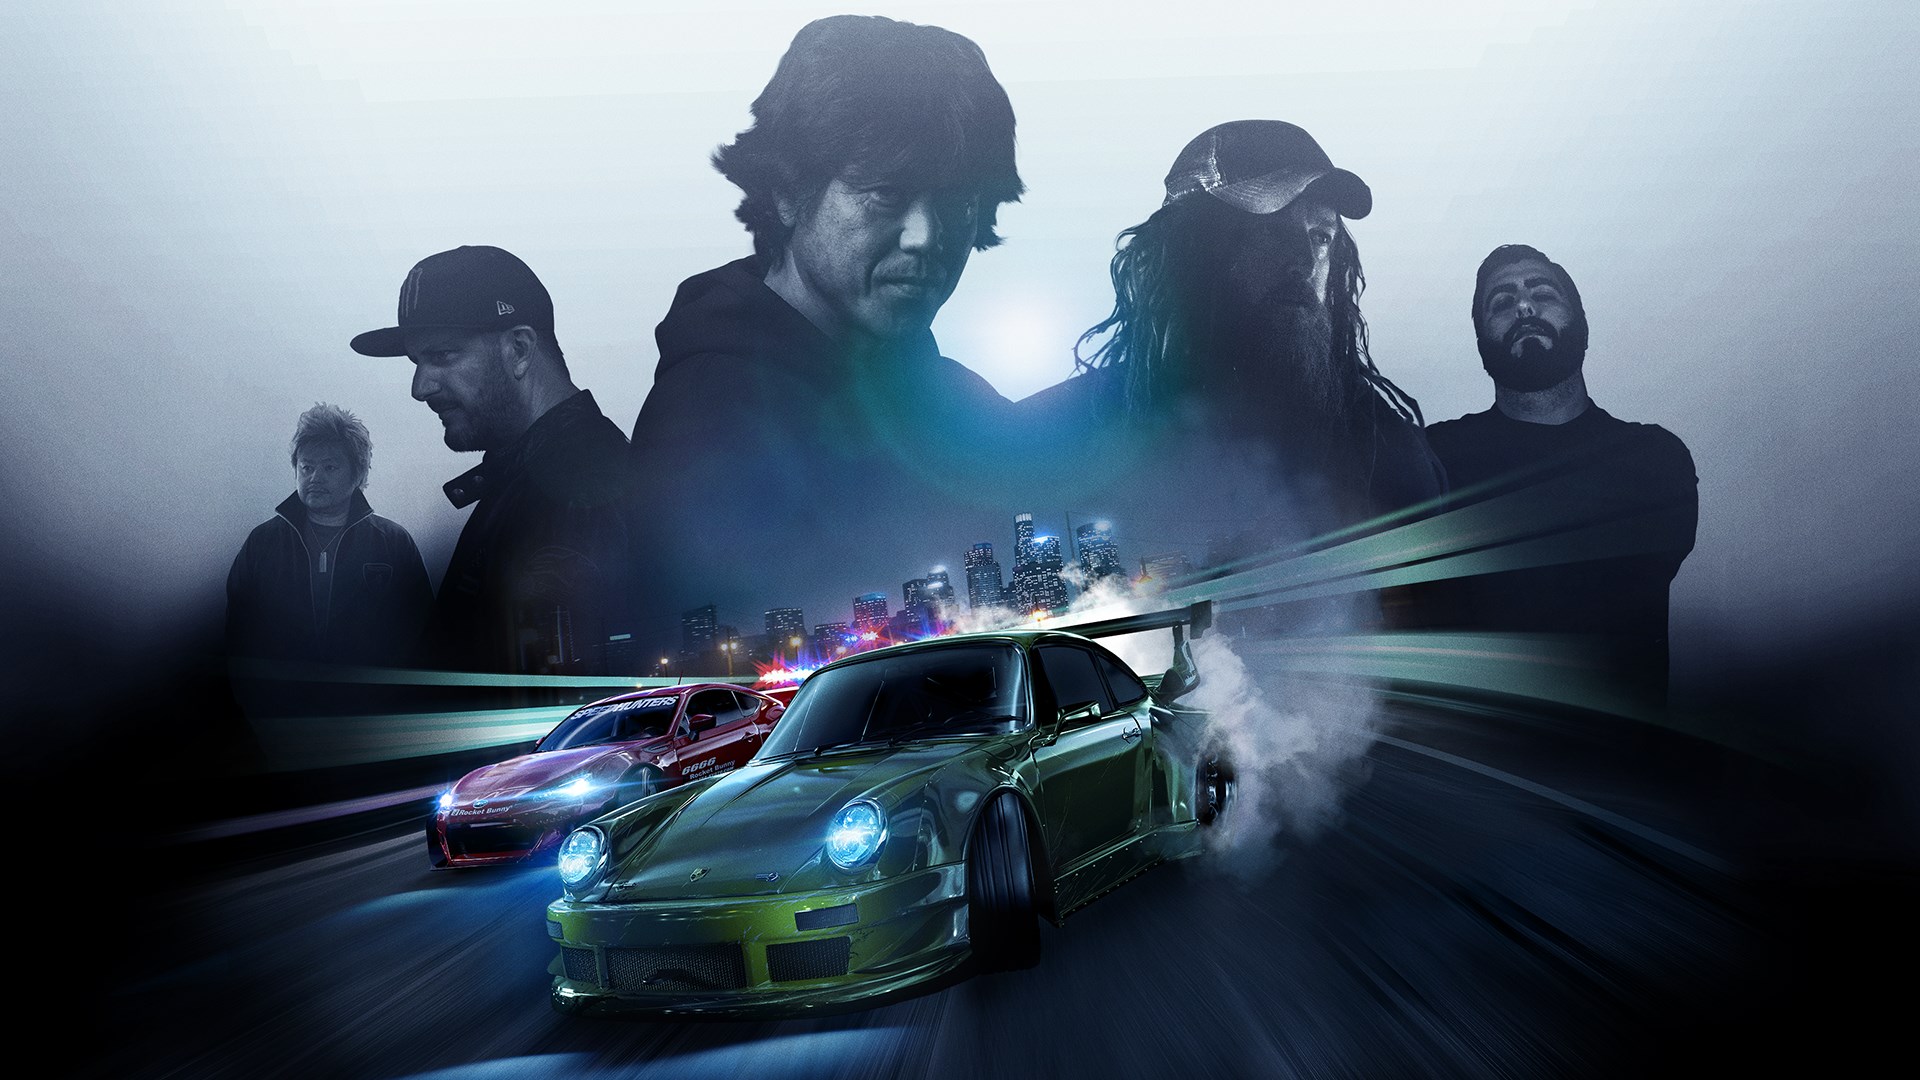 xbox store need for speed heat